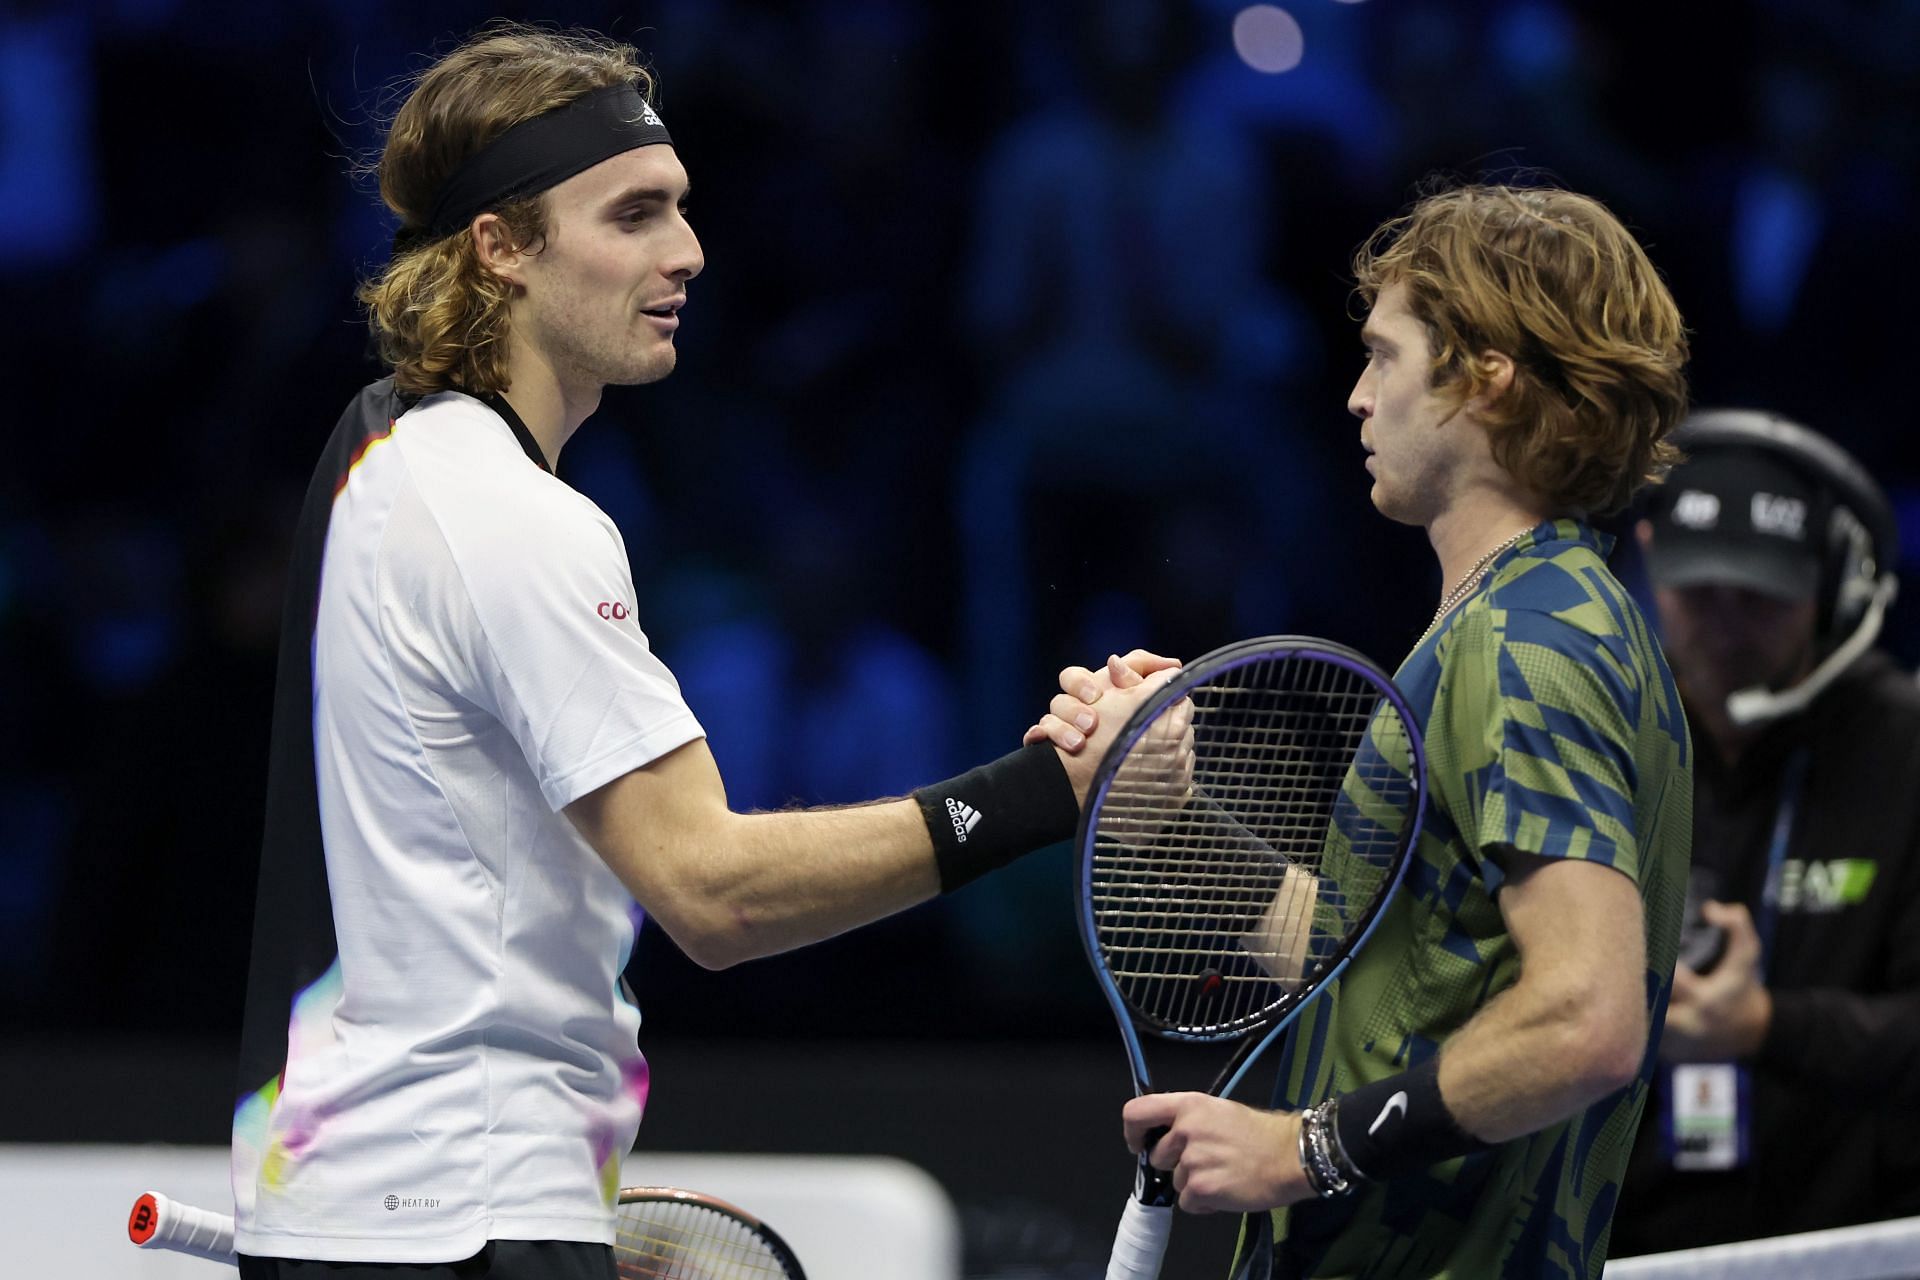 Stefanos Tsitsipas and Andrey Rublev at the ATP Finals. (PC: Getty Images)